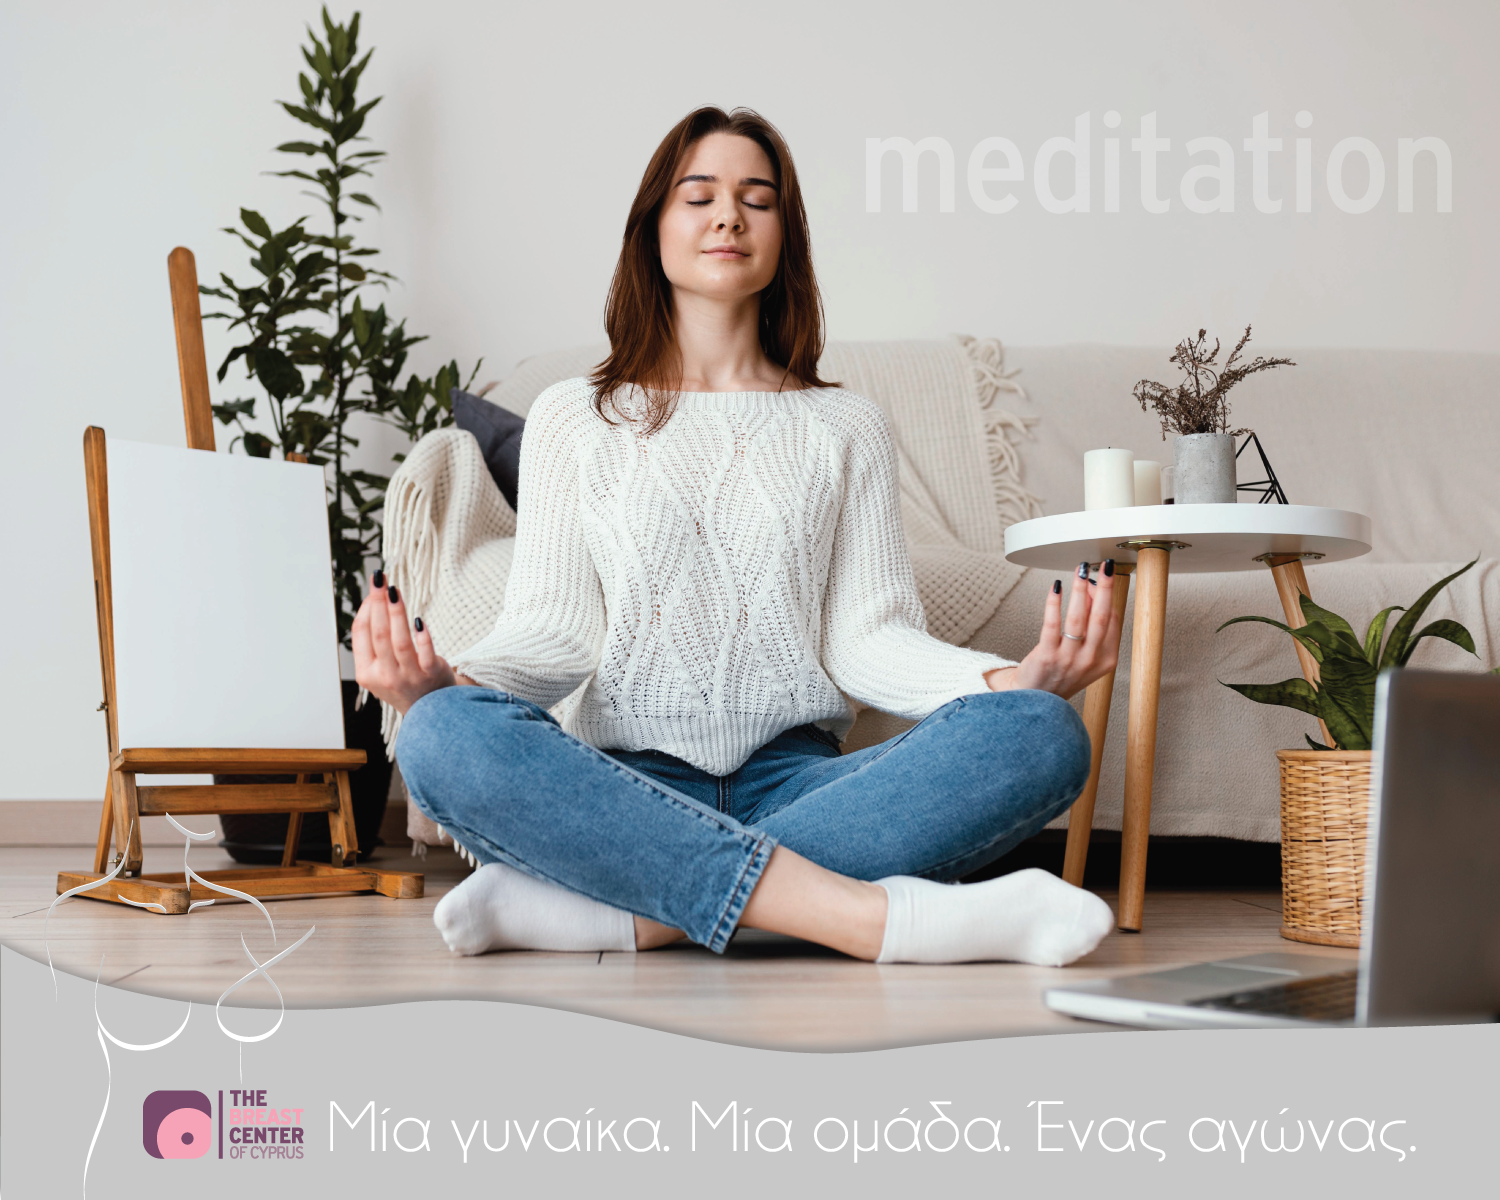 Have you tried 𝓶𝓲𝓷𝓭𝓯𝓾𝓵𝓷𝓮𝓼𝓼? Mindfulness-based interventions have been found to improve health-related quality of life, sleep, fatigue, depression, and anxiety in female breast cancer patients.